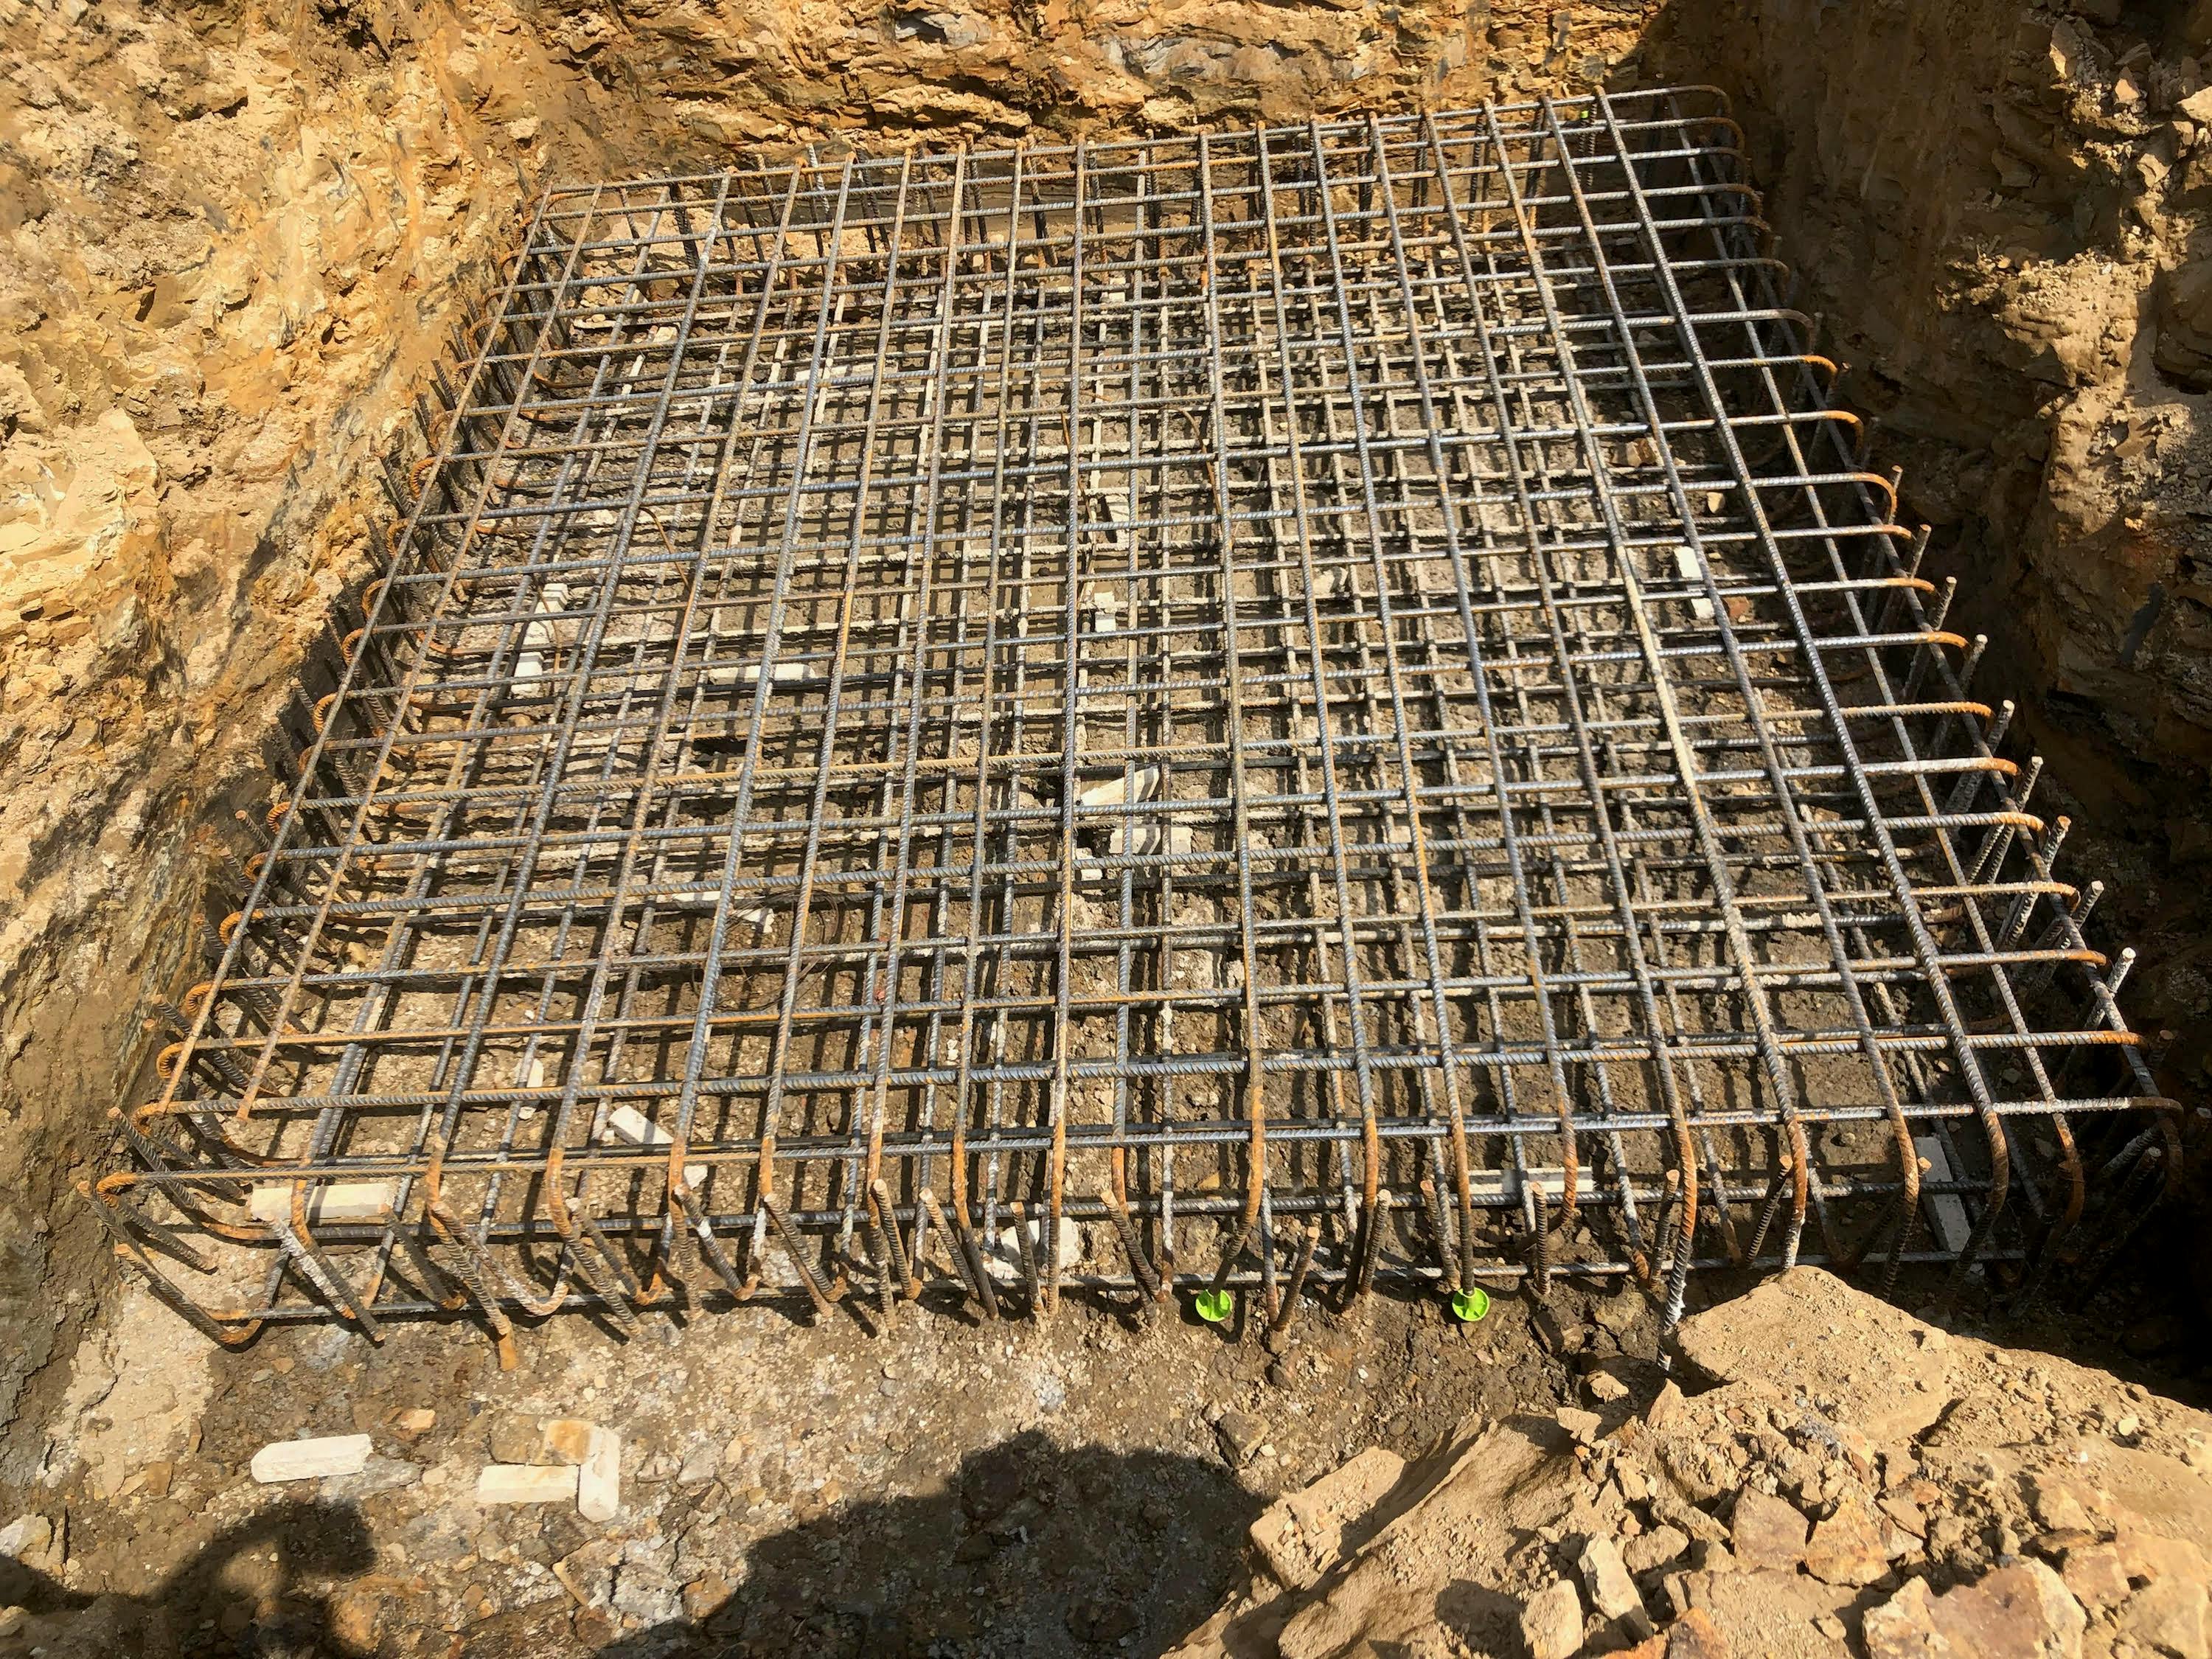 Free stock photo of lift pit reinforcement mesh